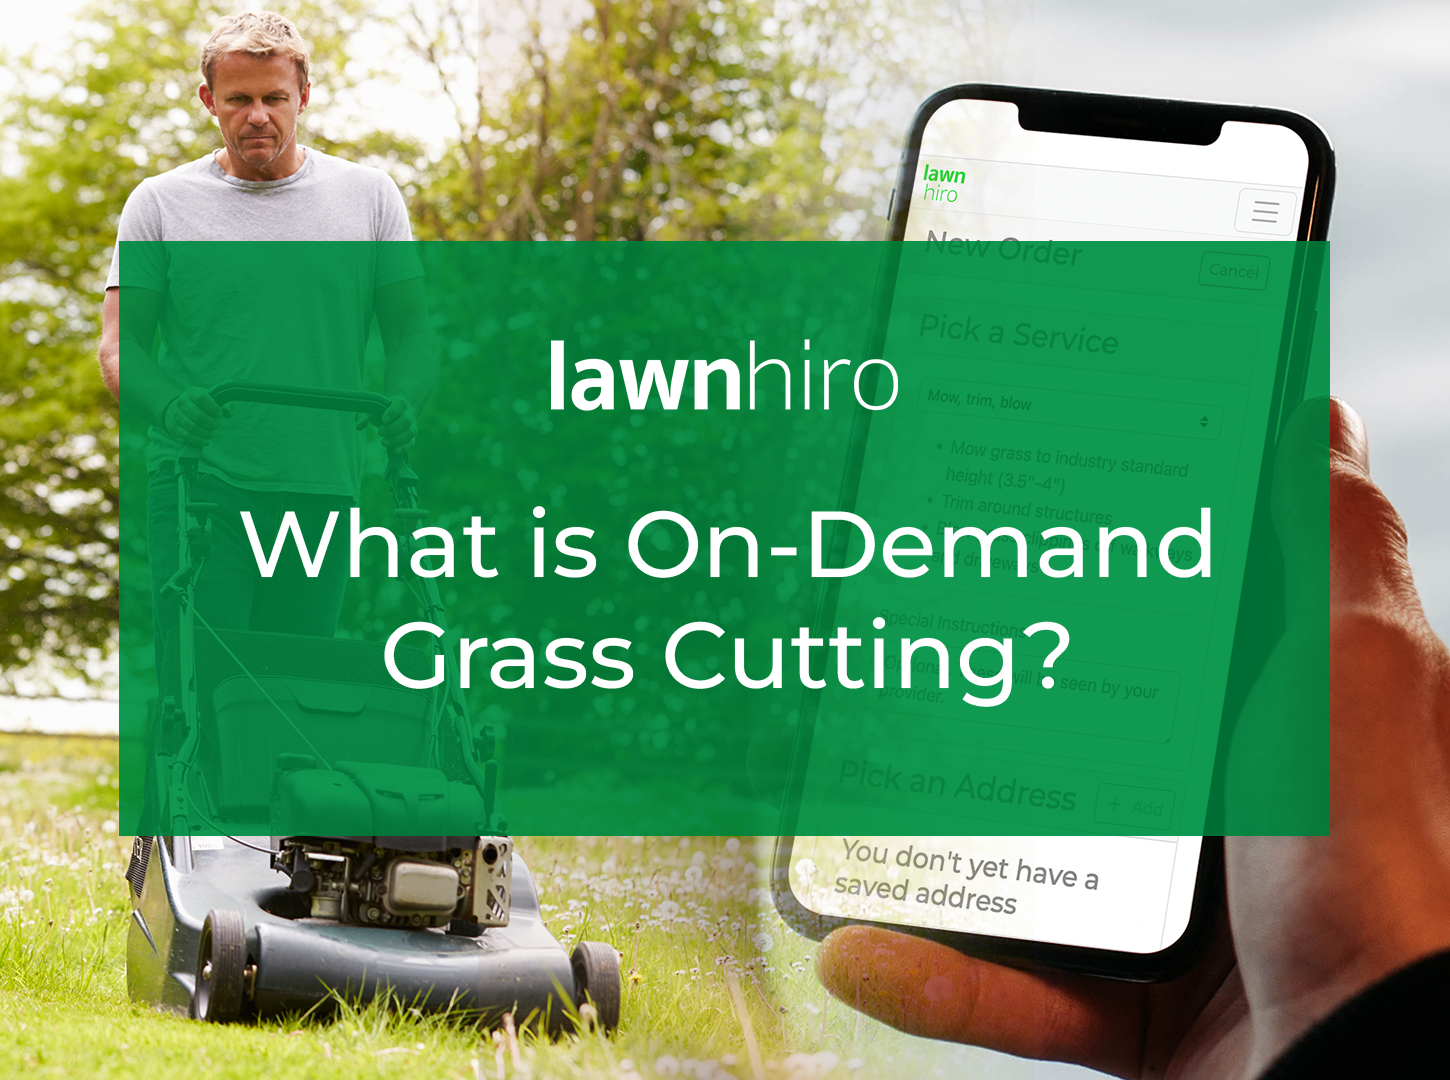 Featured image for “On-Demand Grass Cutting”